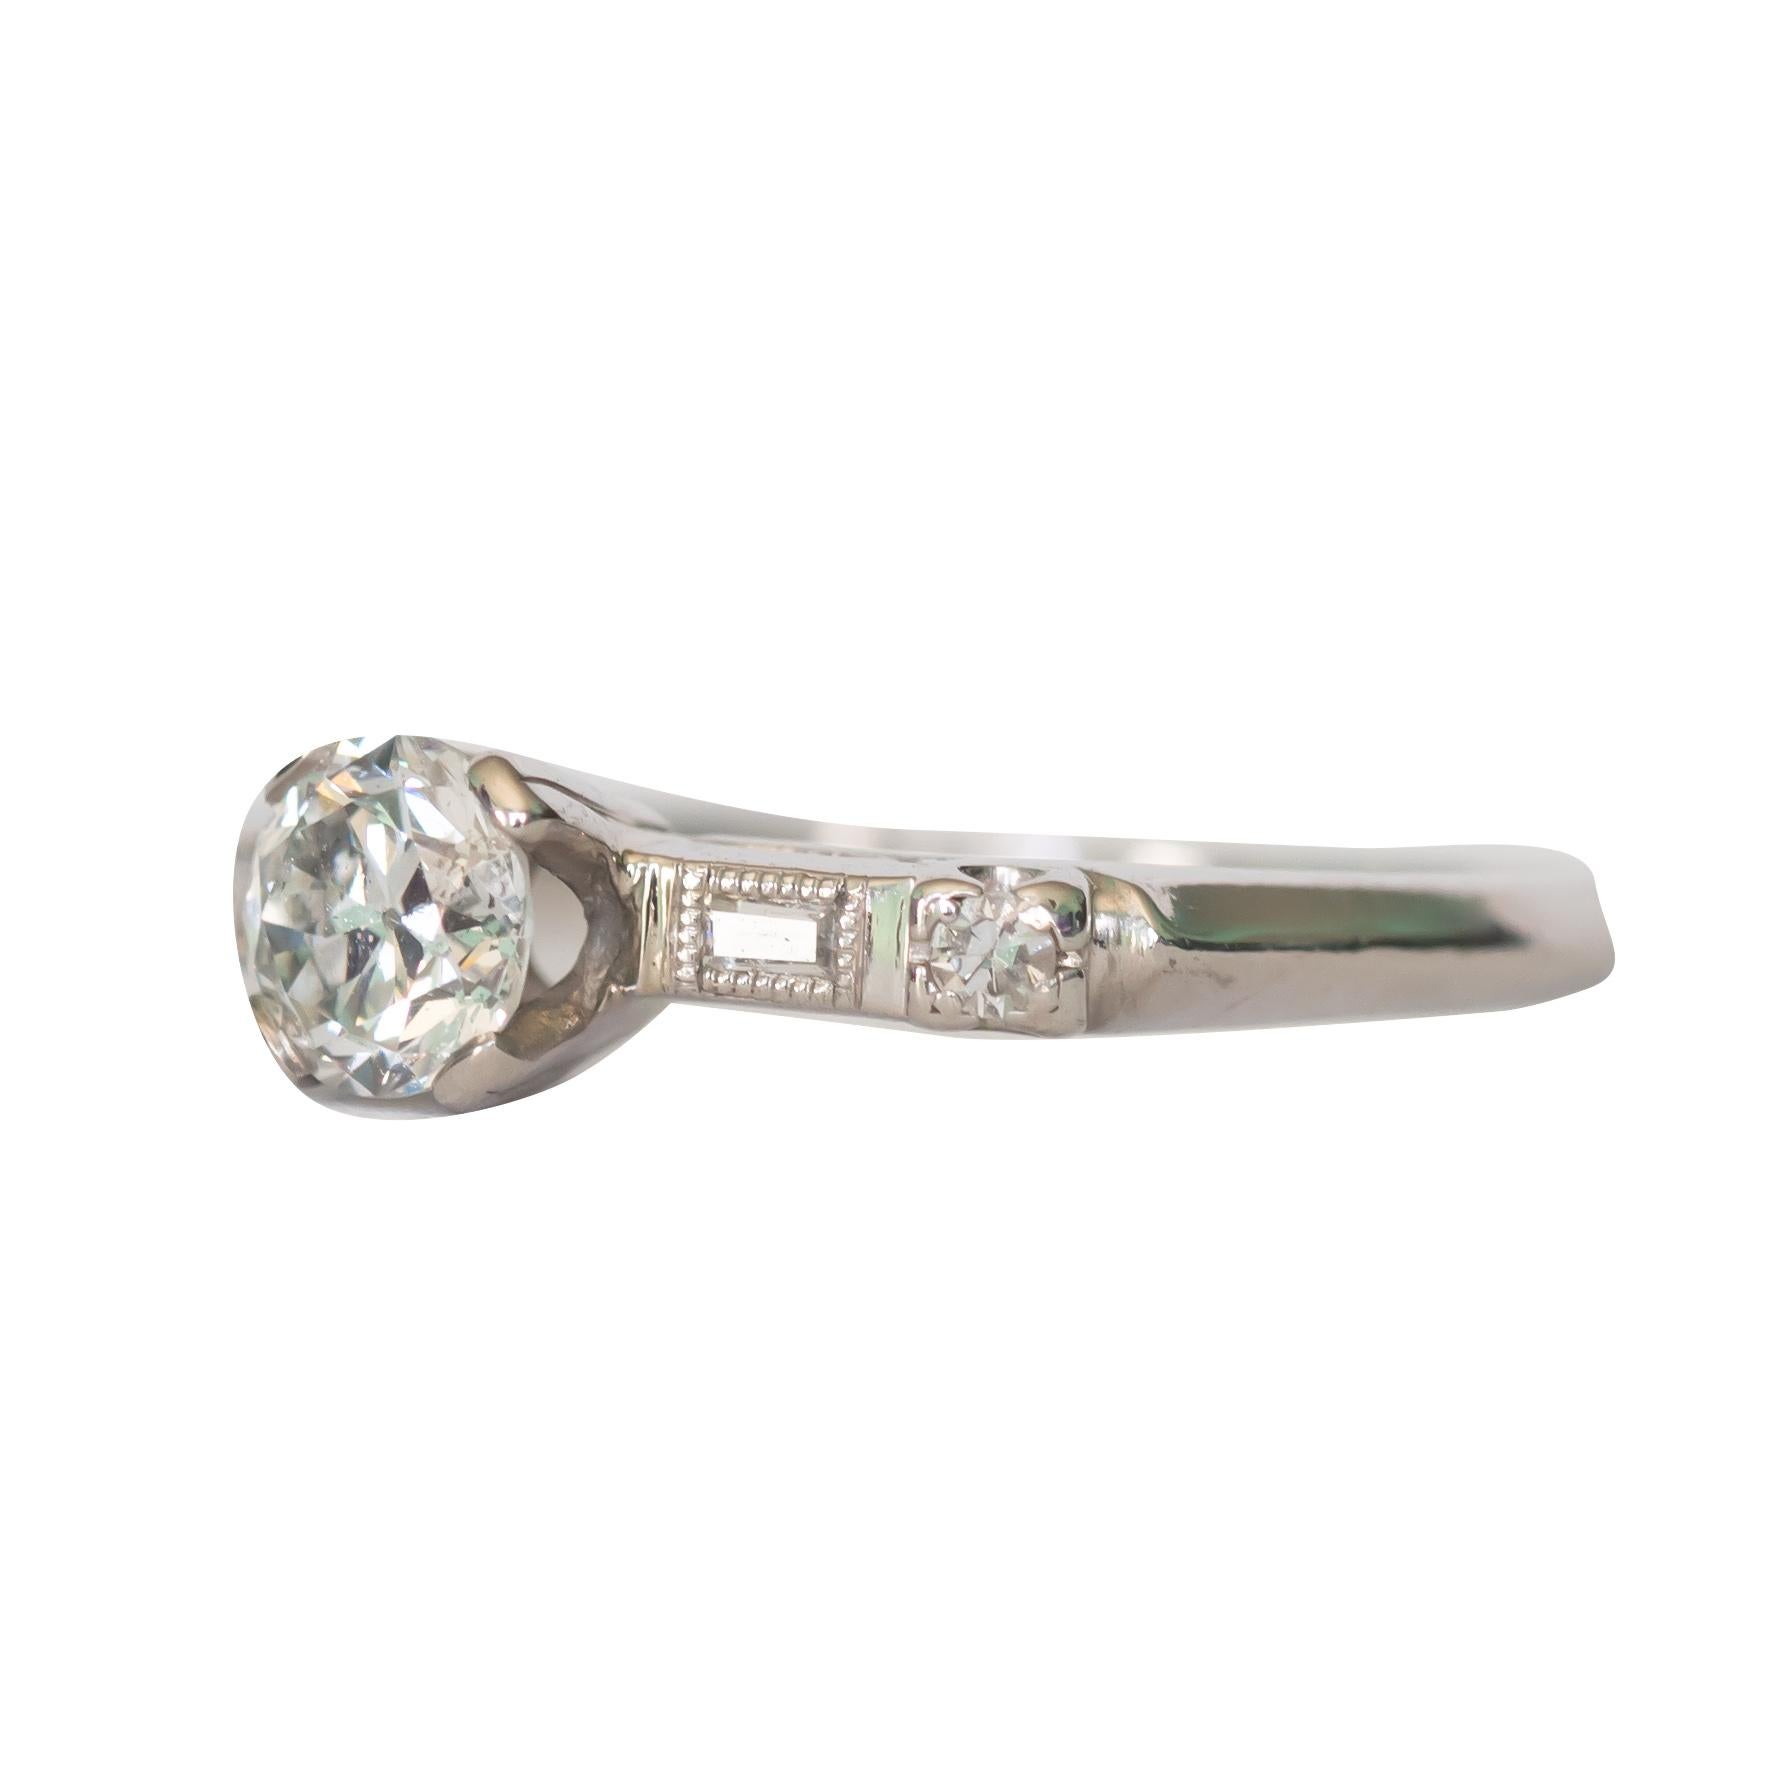 Ring Size: 6
Metal Type: Platinum  [Hallmarked, and Tested]
Weight:  2.5 grams

Center Diamond Details:
GIA REPORT#5202199344 
Weight: .40 carat
Cut: Old European 
Color: H
Clarity: SI2

Side Diamond Details:
Weight: .10 carat, total weight
Cut: Old